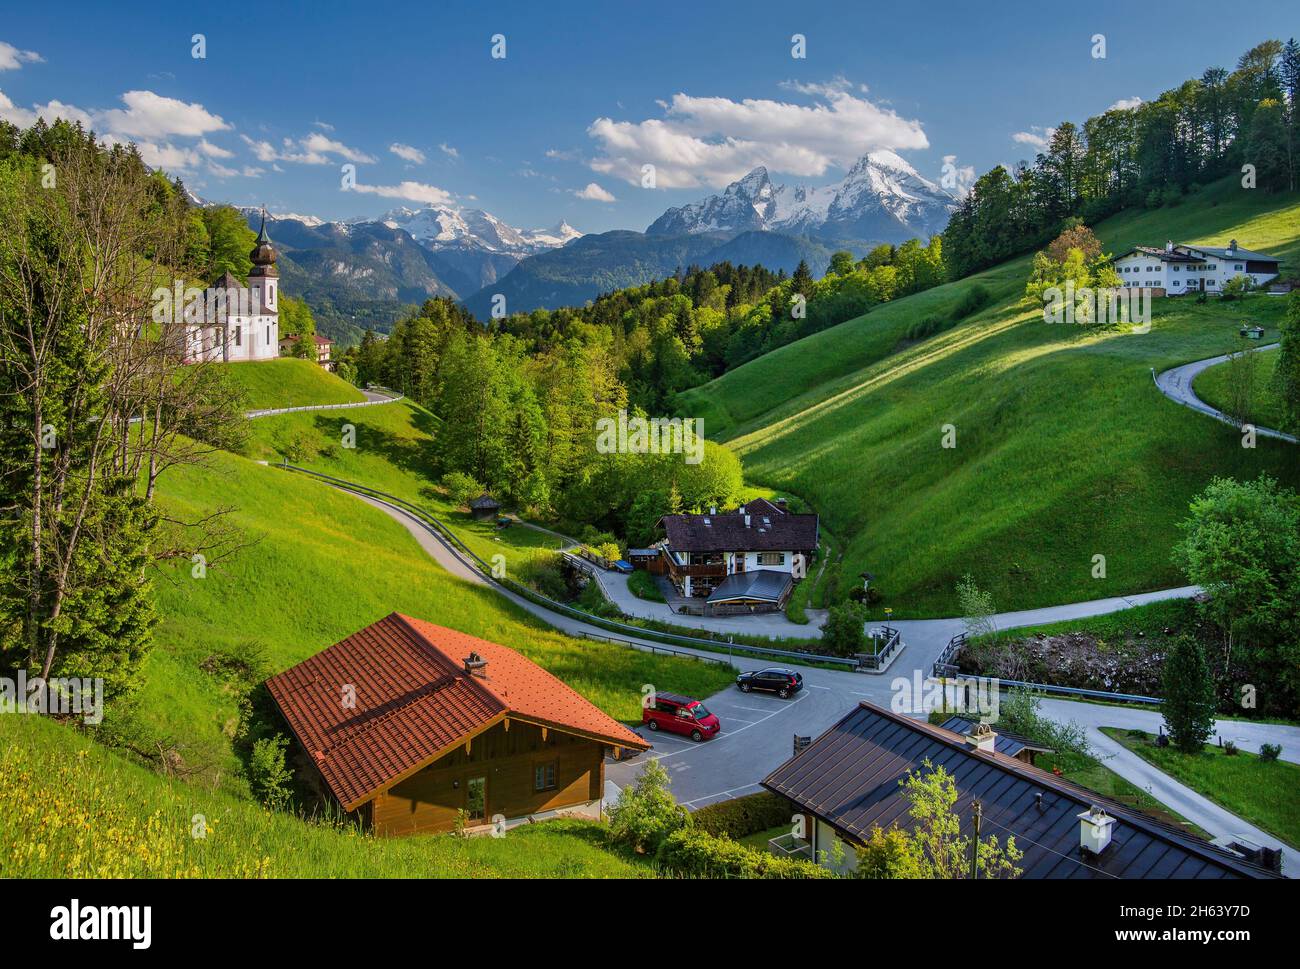 high valley of maria gern with the pilgrimage church against watzmann 2713m,berchtesgaden,berchtesgaden alps,berchtesgadener land,upper bavaria,bavaria,germany Stock Photo